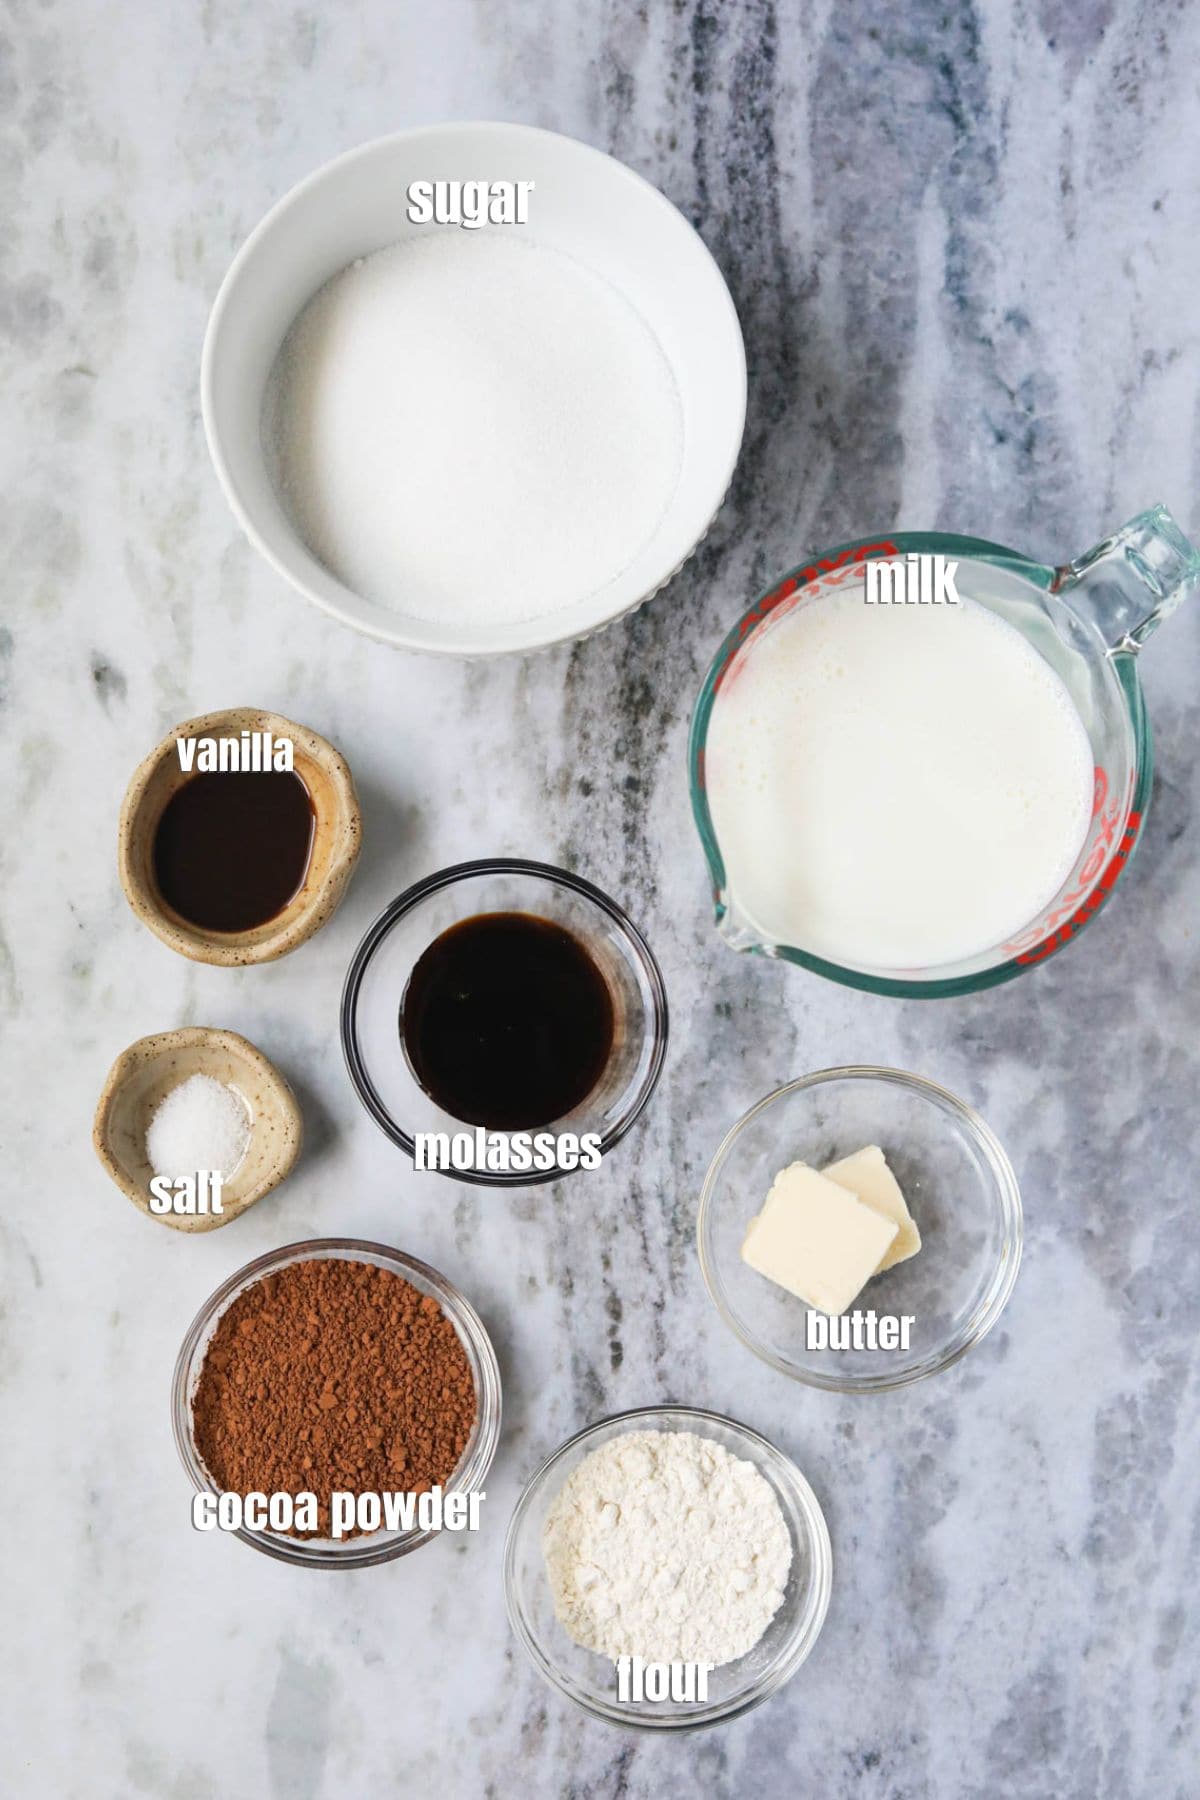 Ingredients for making chocolate gravy arranged on a white surface.